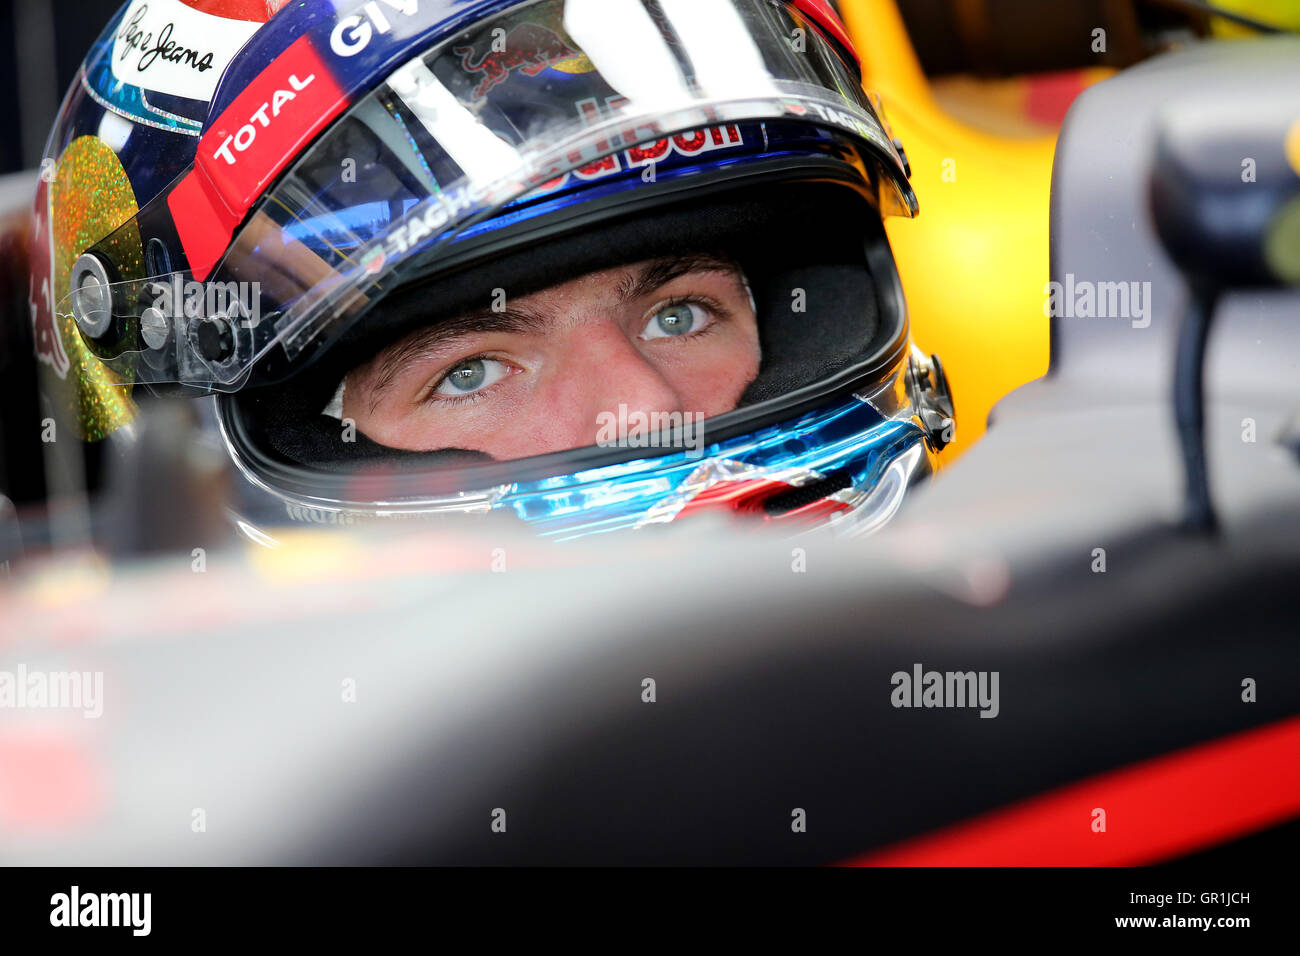 Hockenheim, Germany. 29th July, 2016. Dutch Formula 1 race driver Max Verstappen of Red Bull Racing sitting in his race car during the first free practice at Hockenheimring in Hockenheim, Germany, 29 July 2016. The Grand Prix took place on 31 July 2016. PHOTO: JAN WOITAS/dpa/Alamy Live News Stock Photo